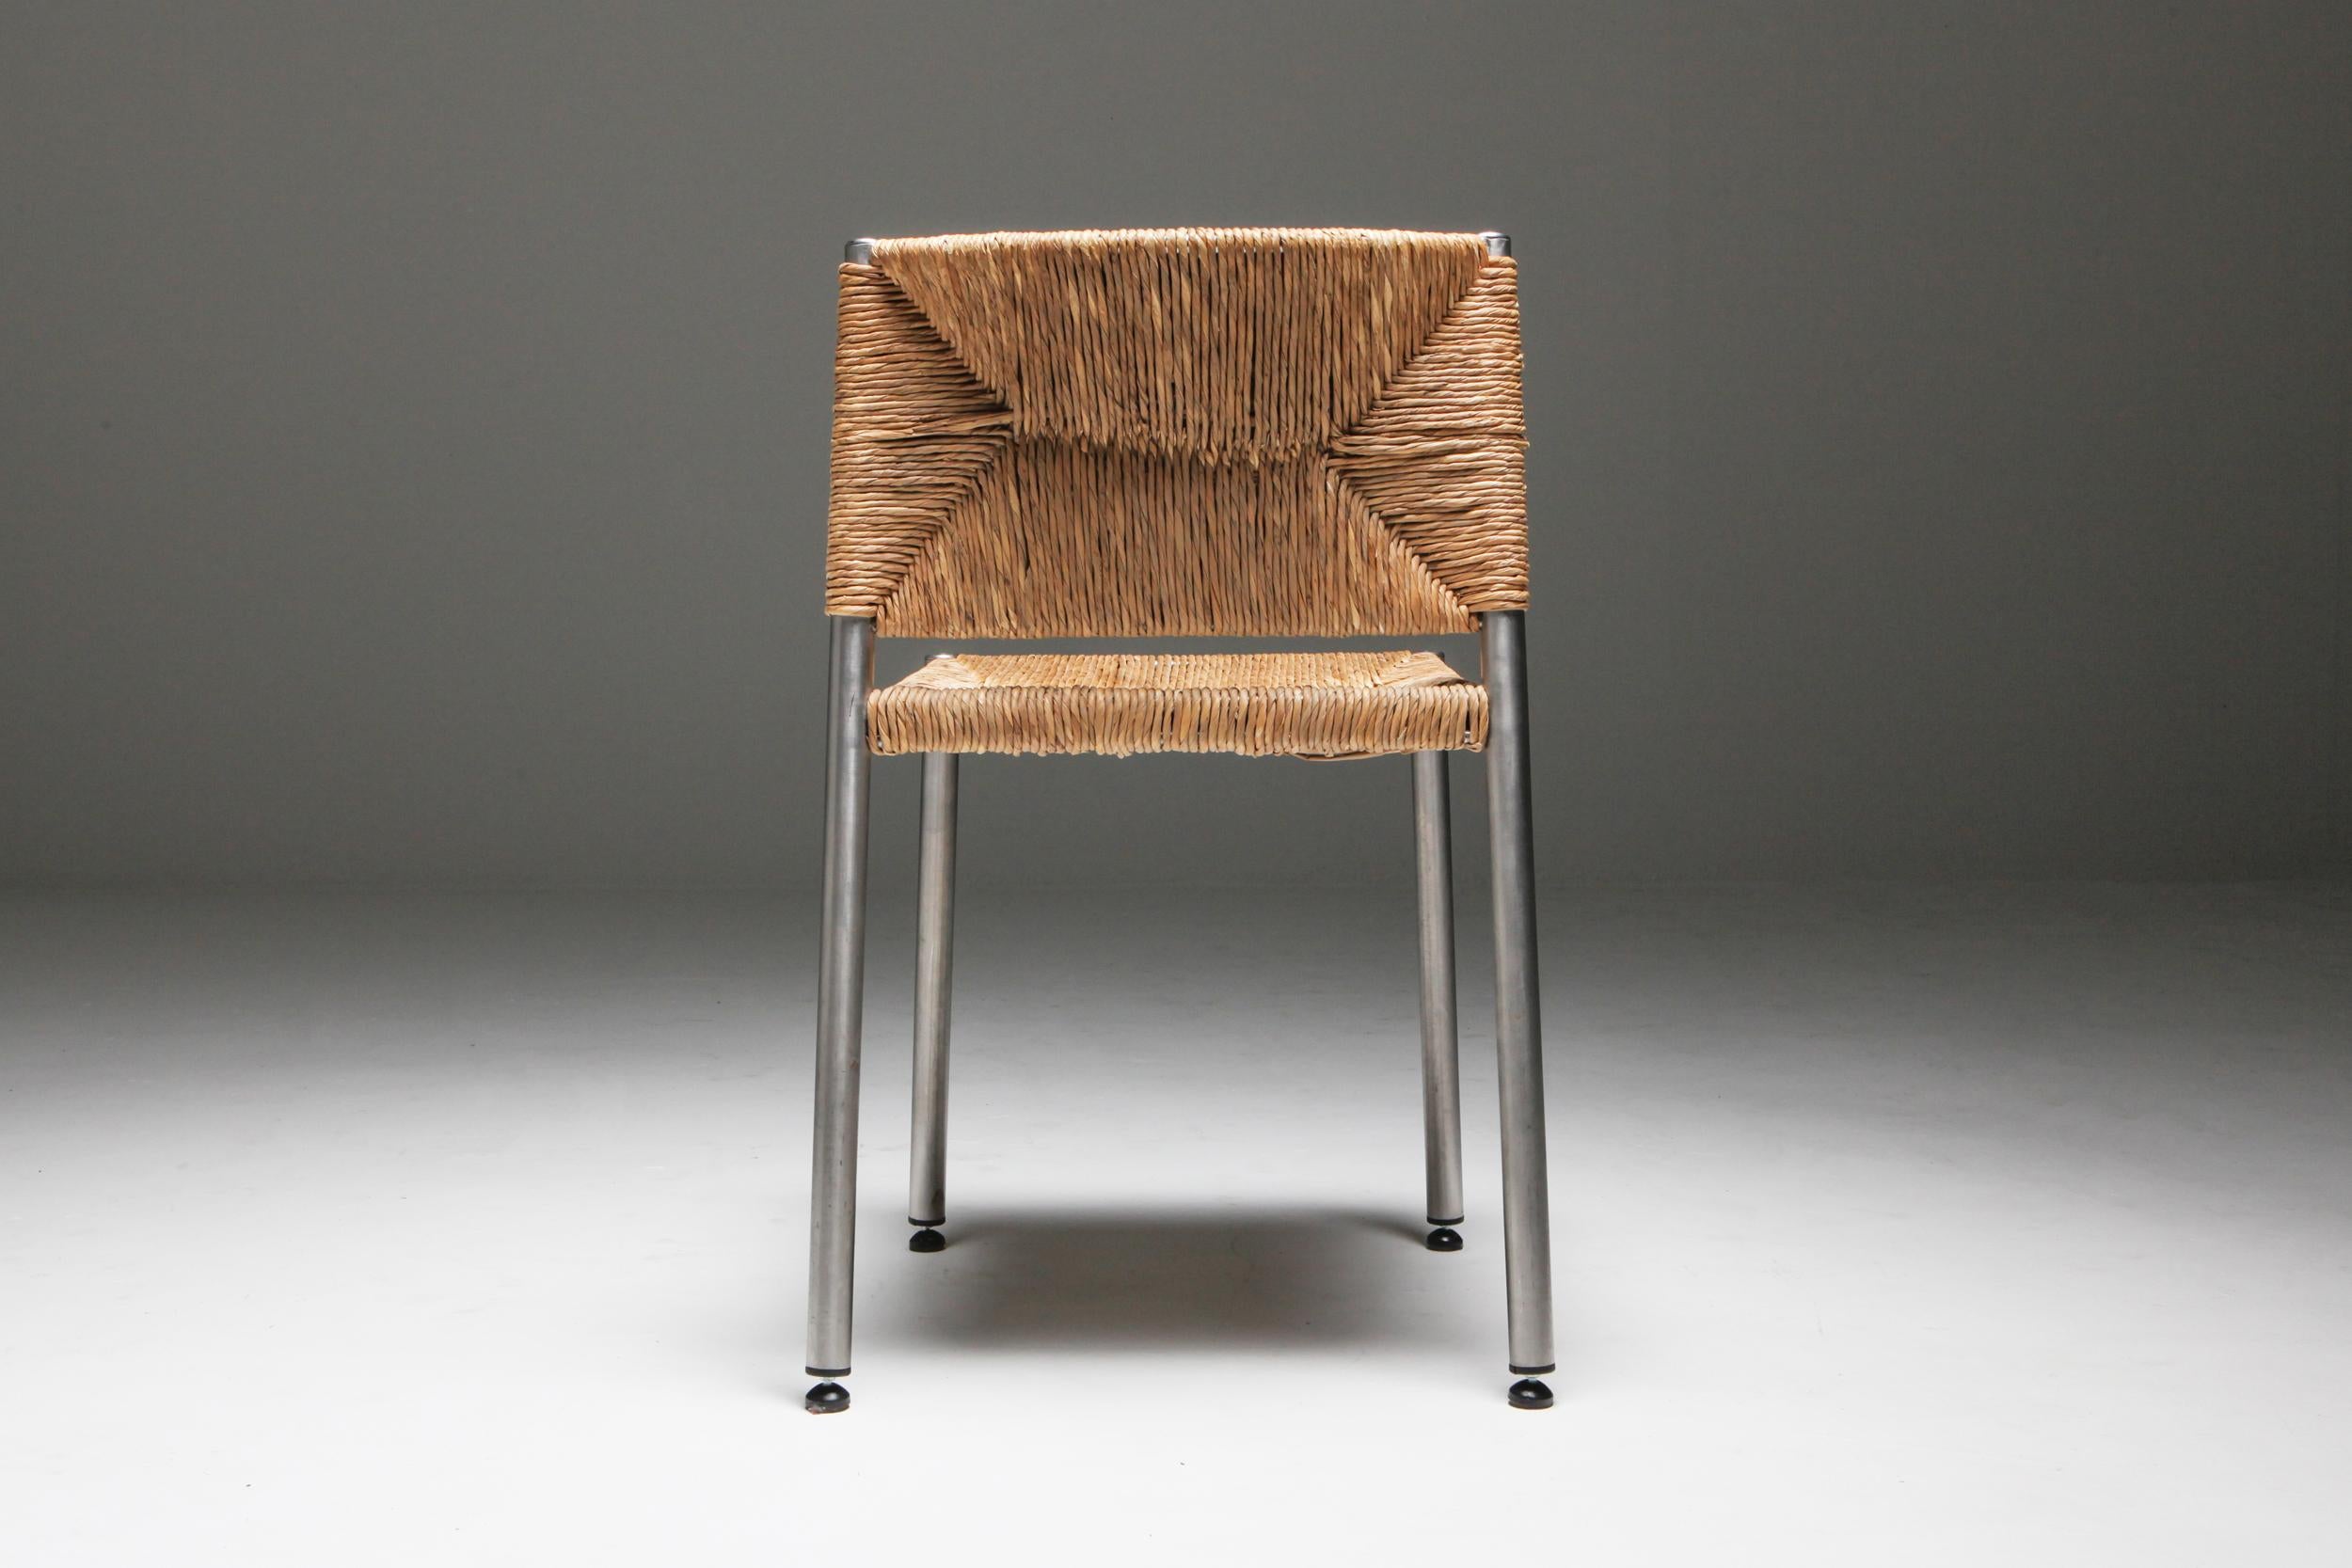 Contemporary Rustic Modern Chairs in Seagrass and Aluminum 3